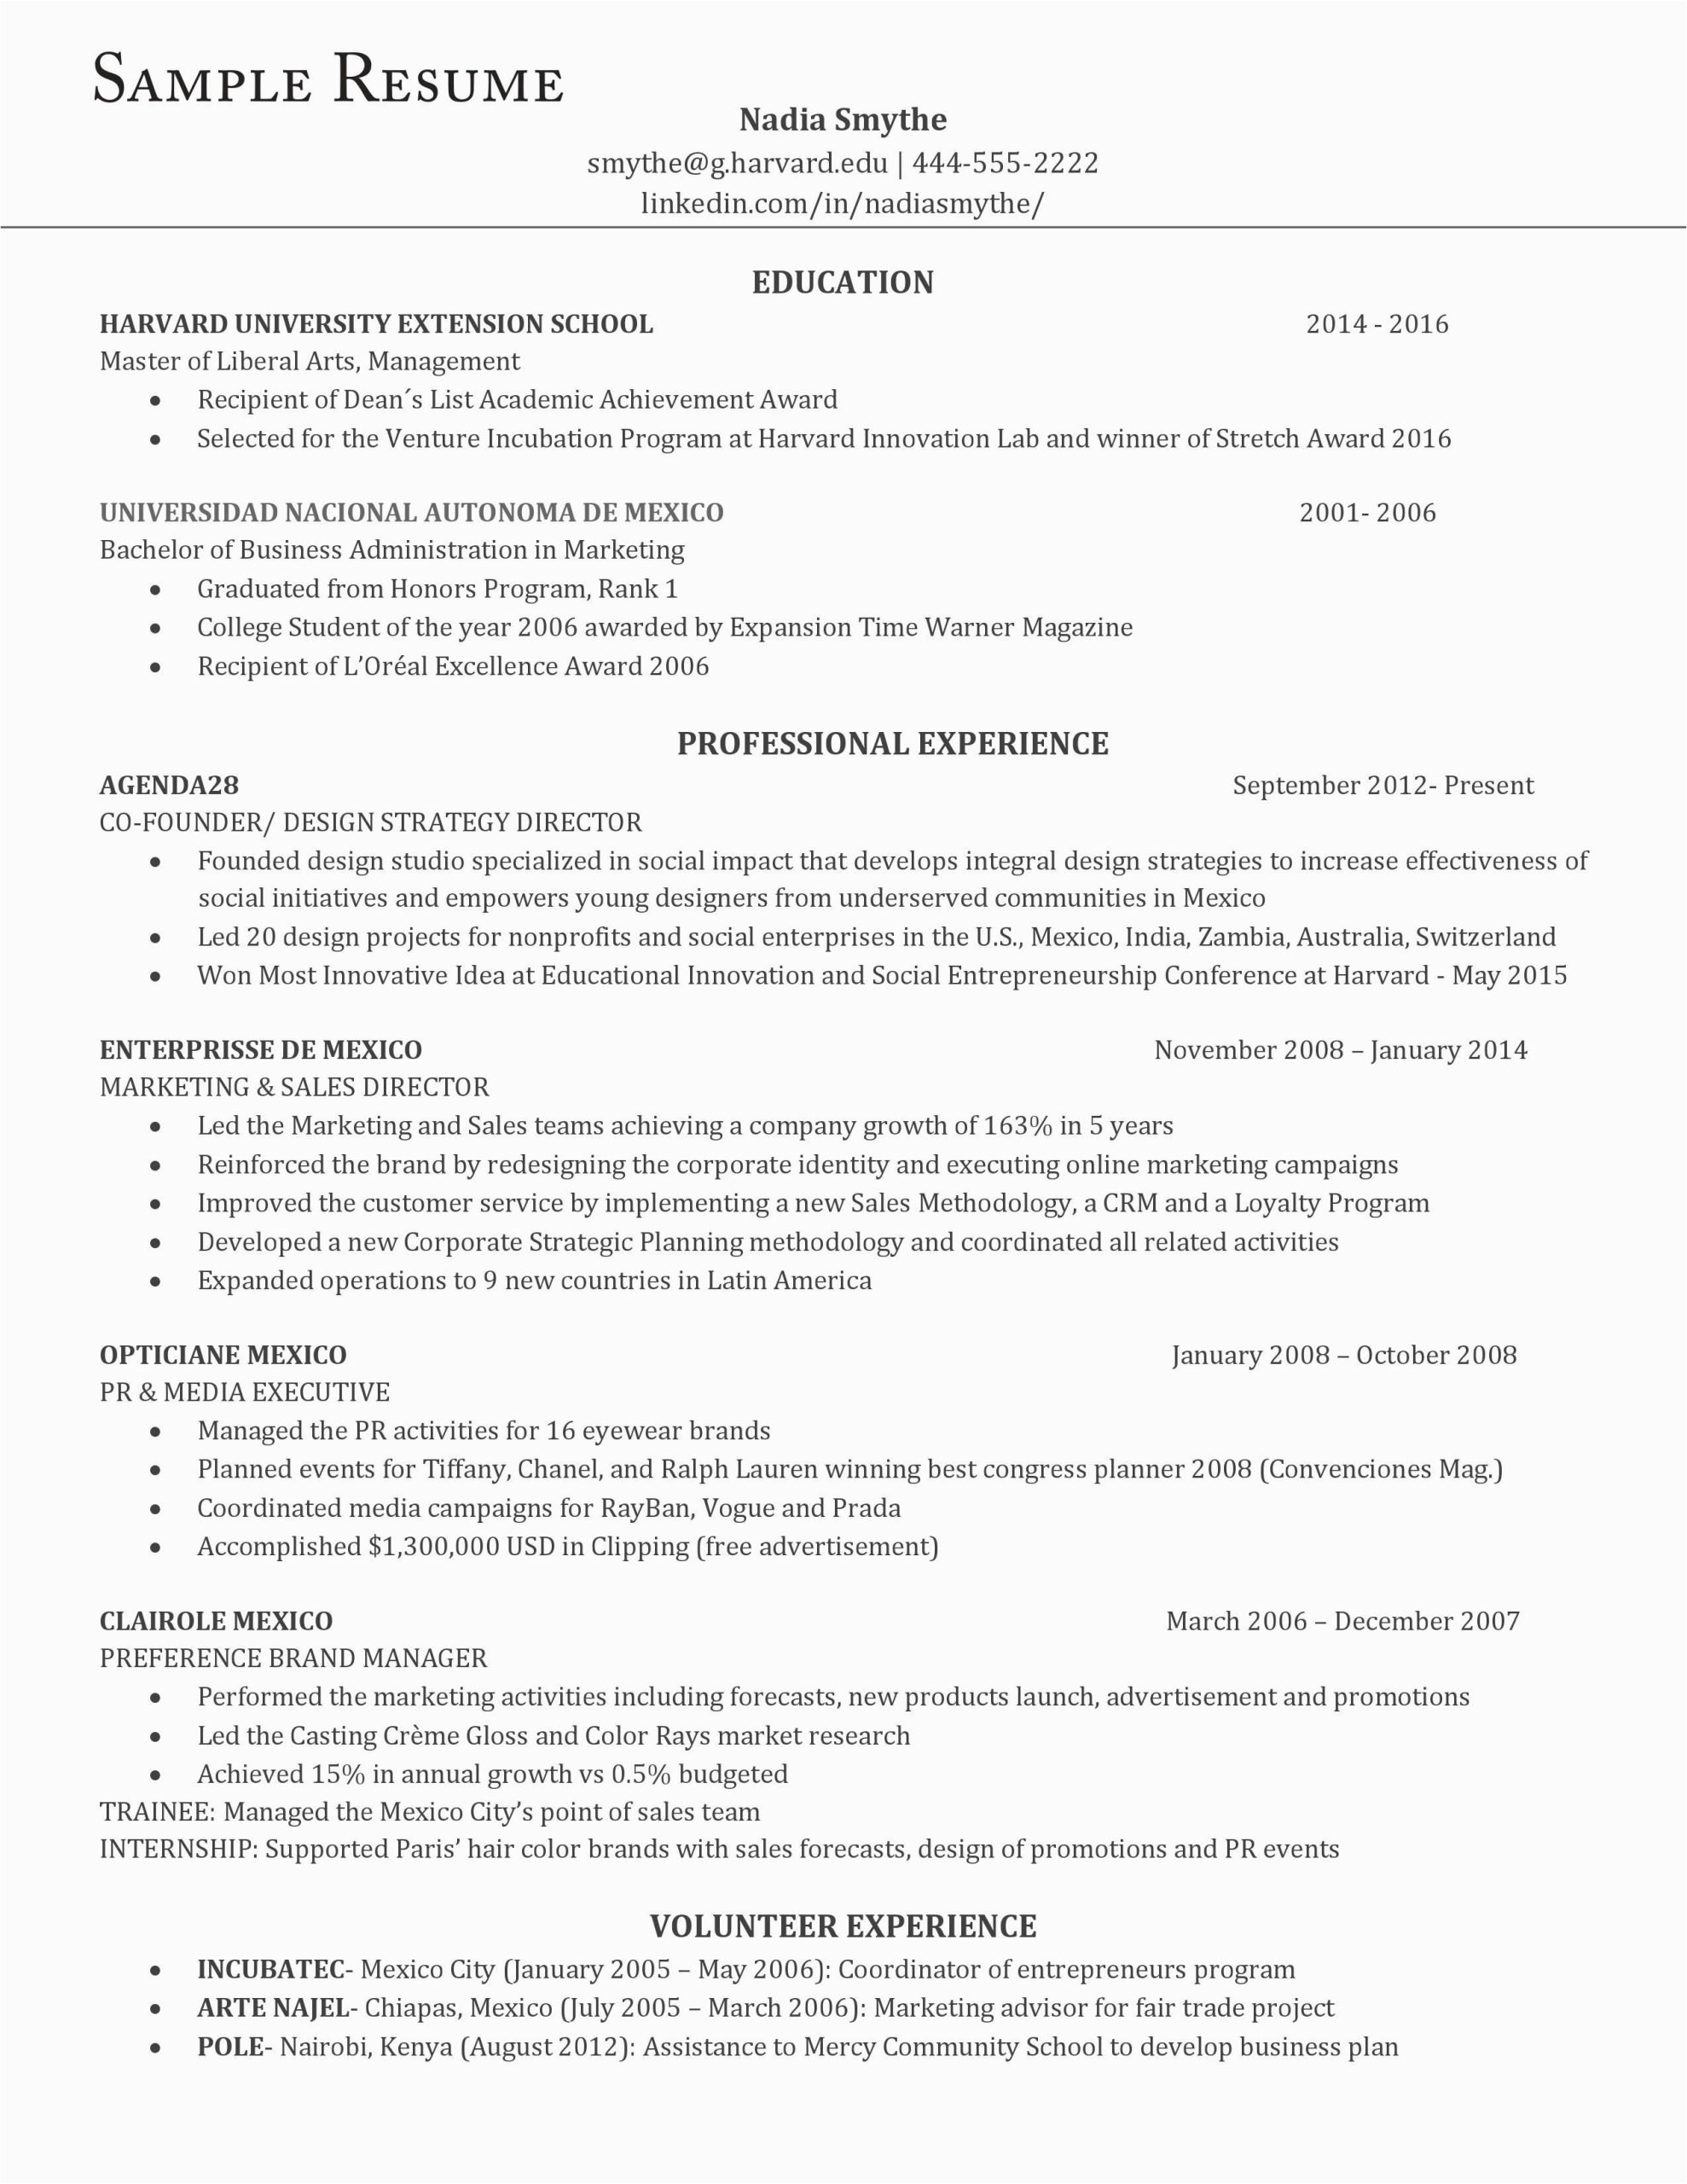 Resume for Masters Application Sample Harvard Here S An Example Of the Perfect Resume According to Harvard Career